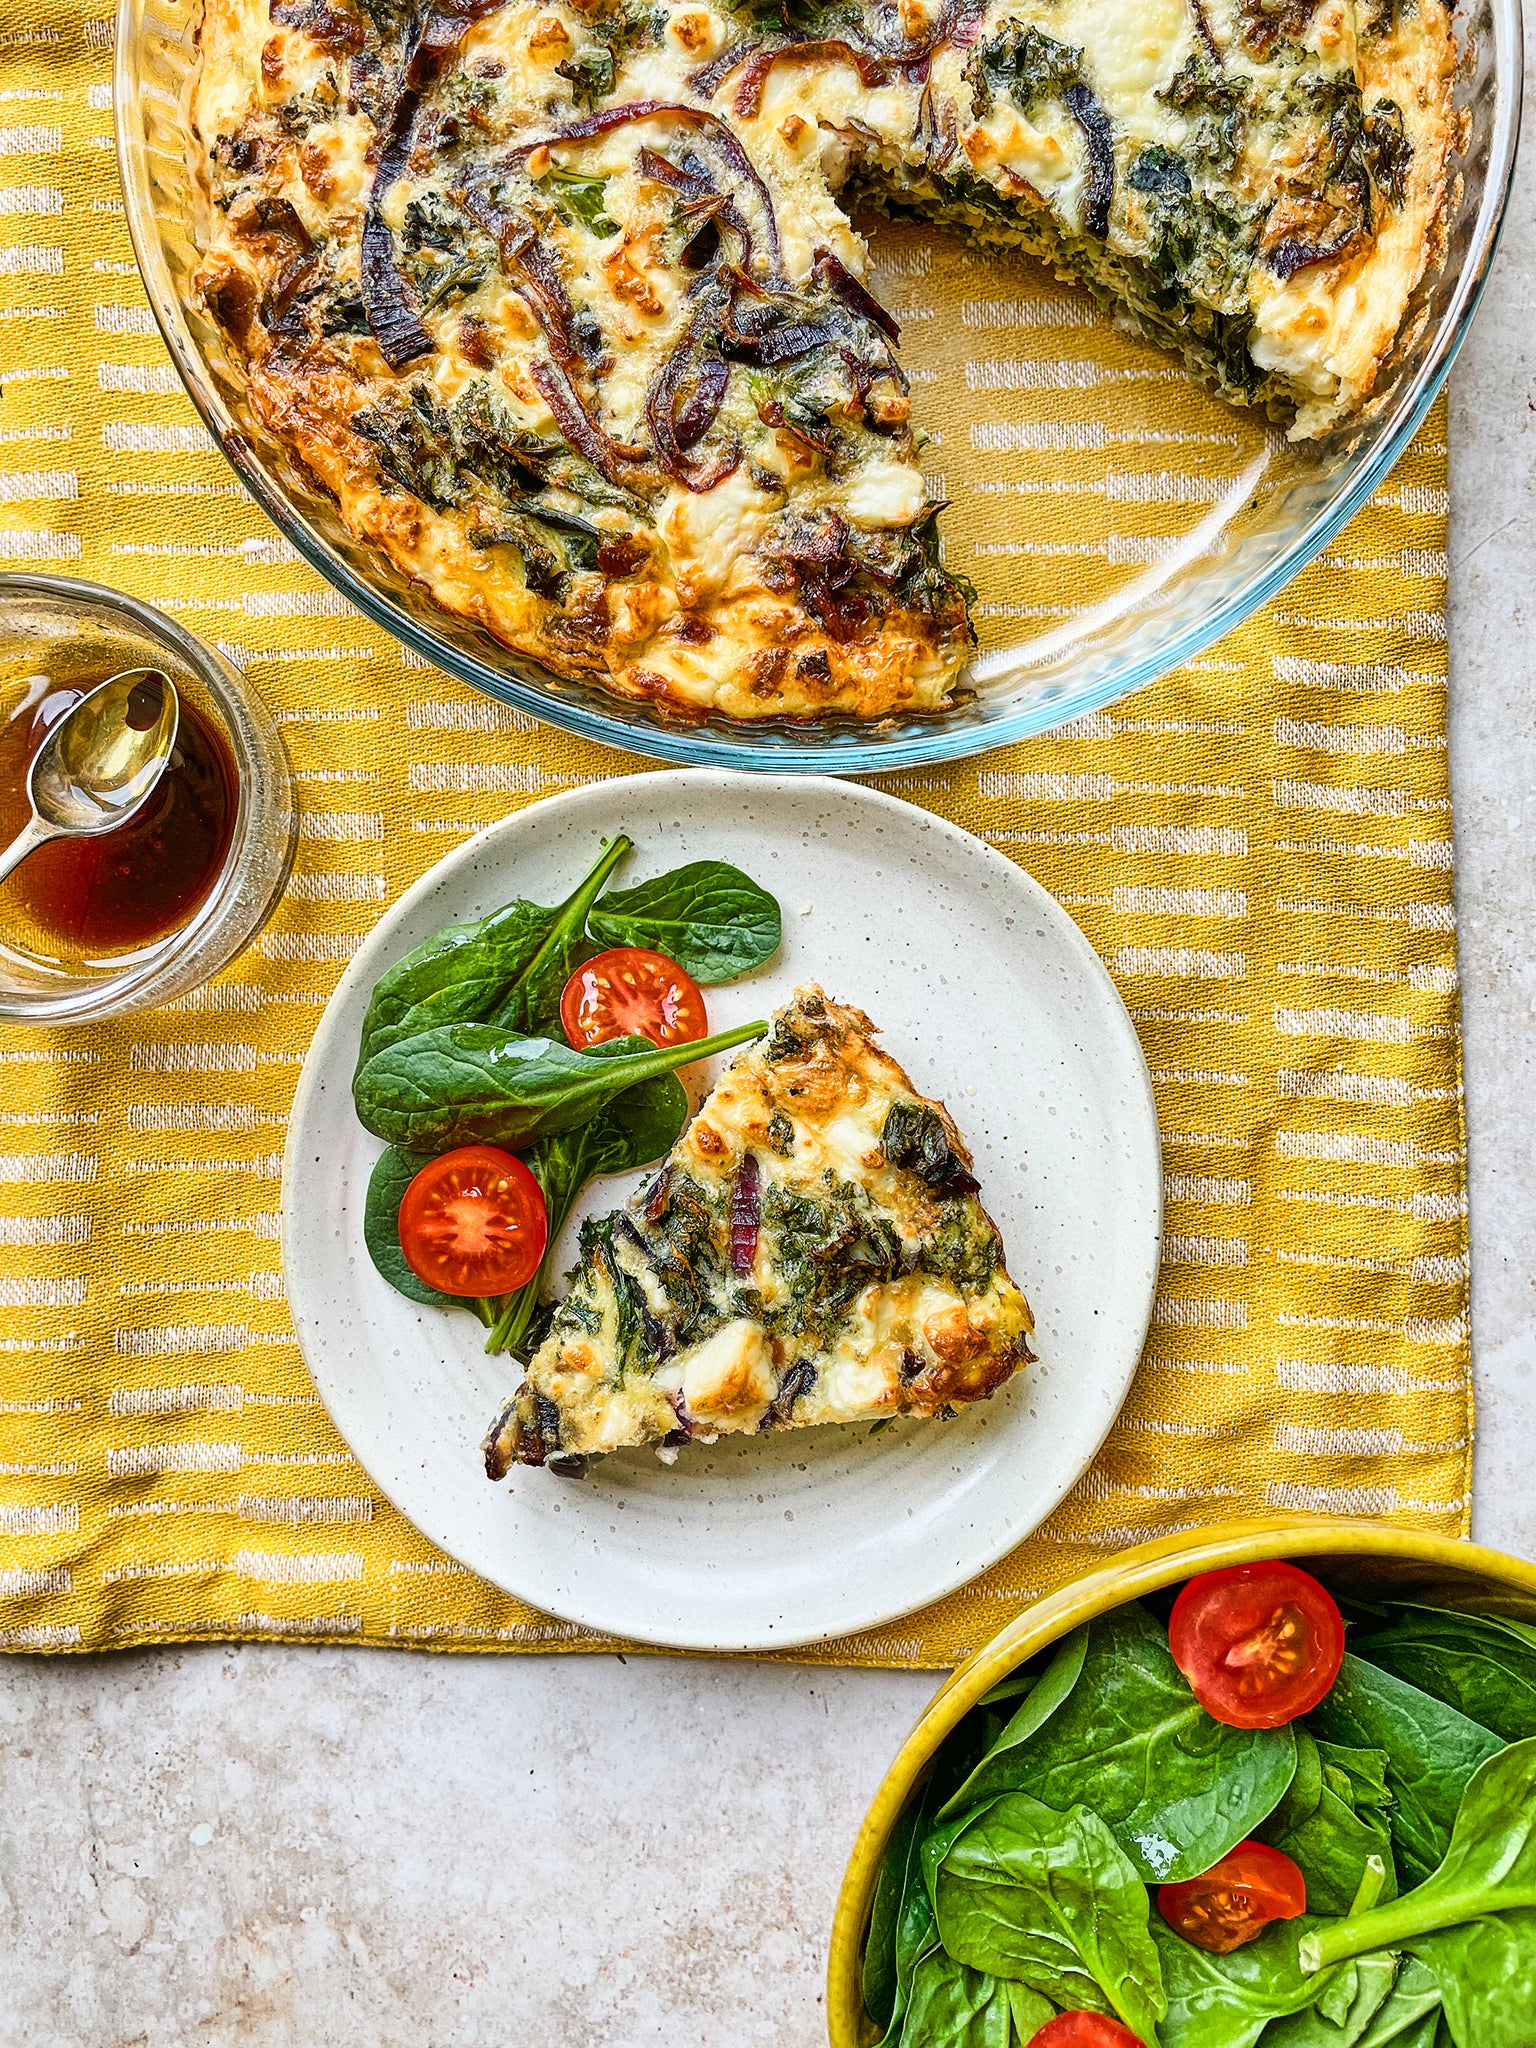 The kale crustless quiche can be made ahead and goes down a storm at picnics